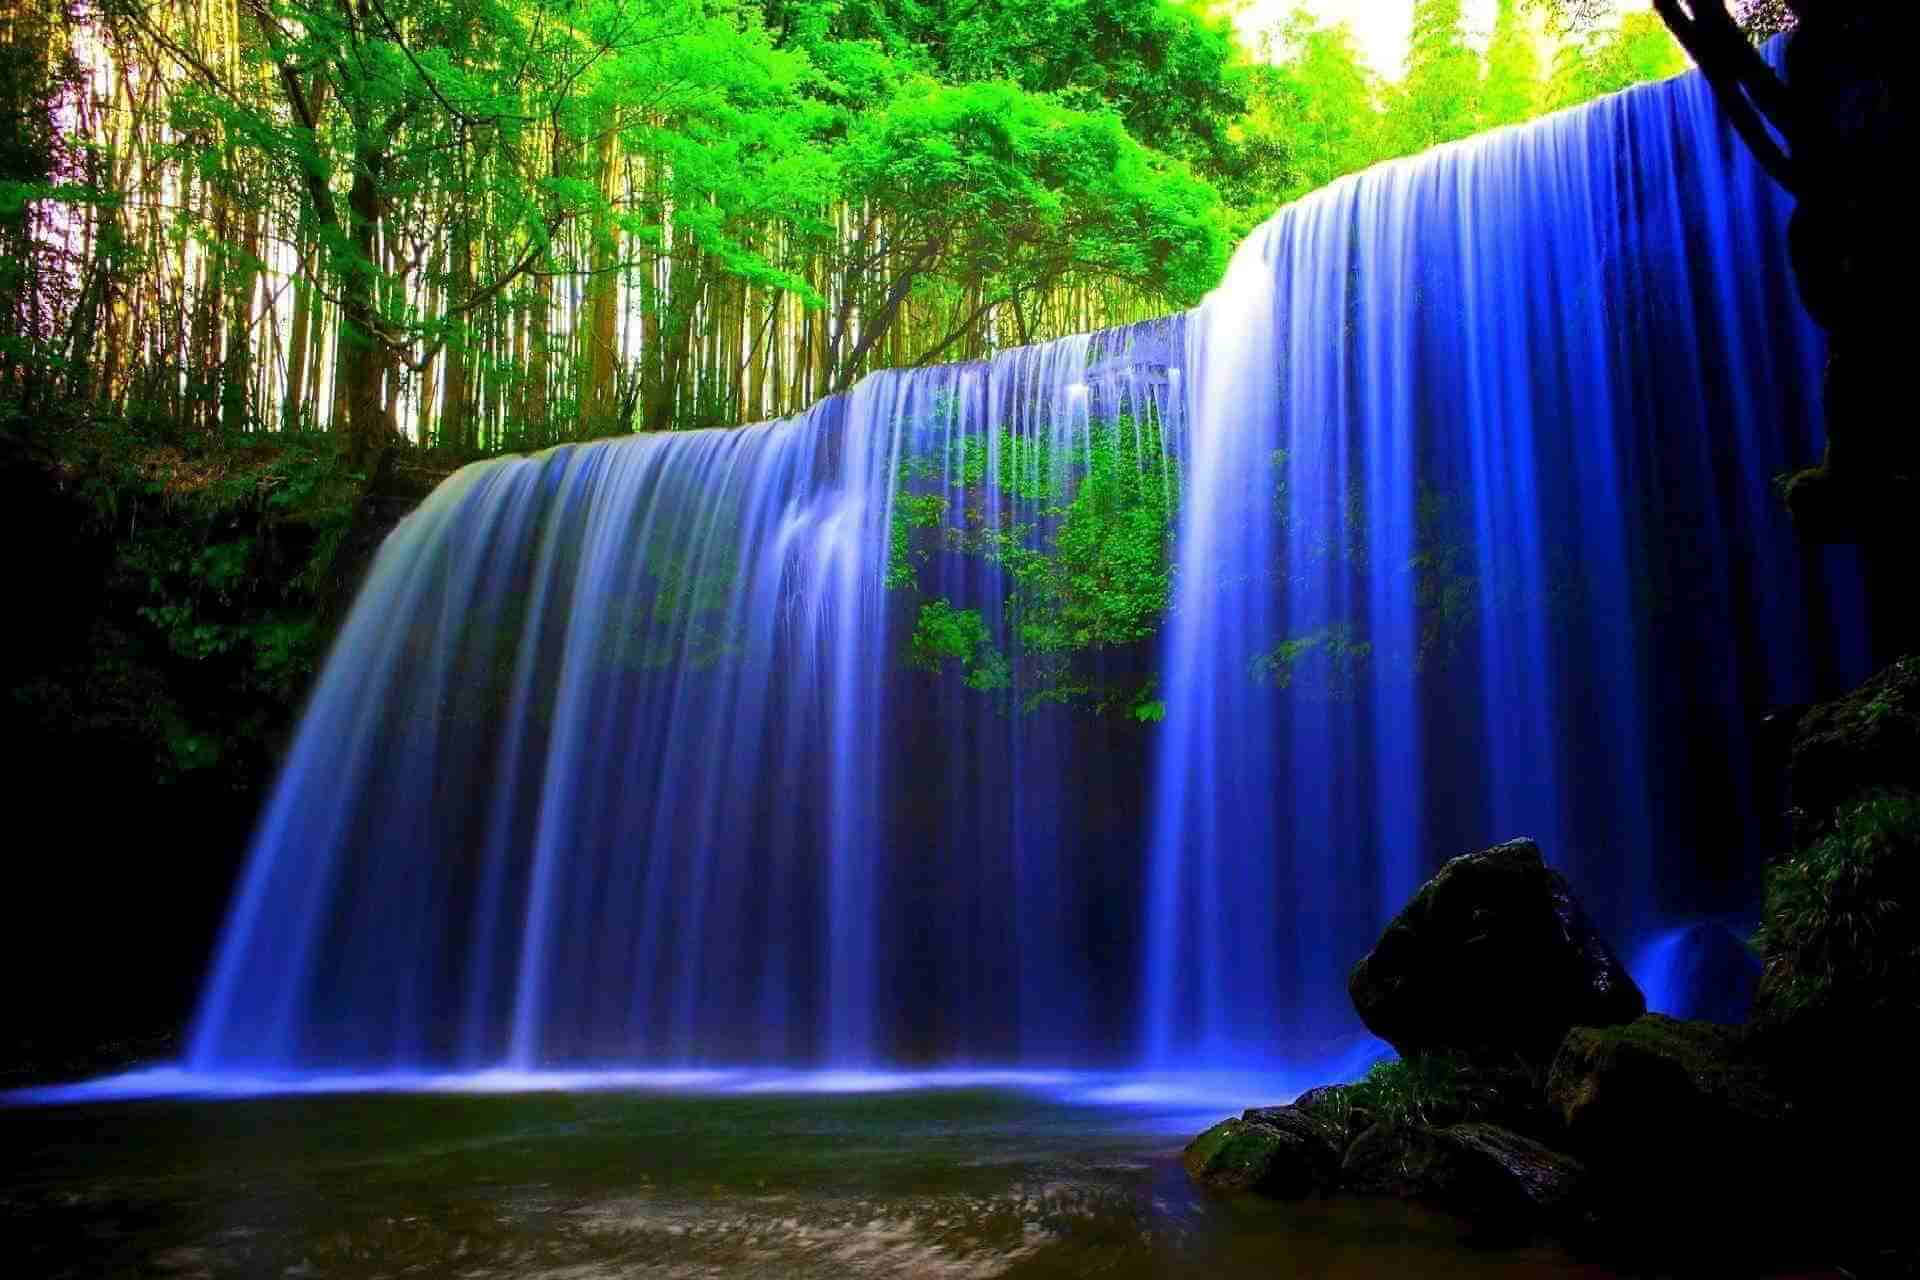 A Waterfall In The Forest With Blue Water Wallpaper